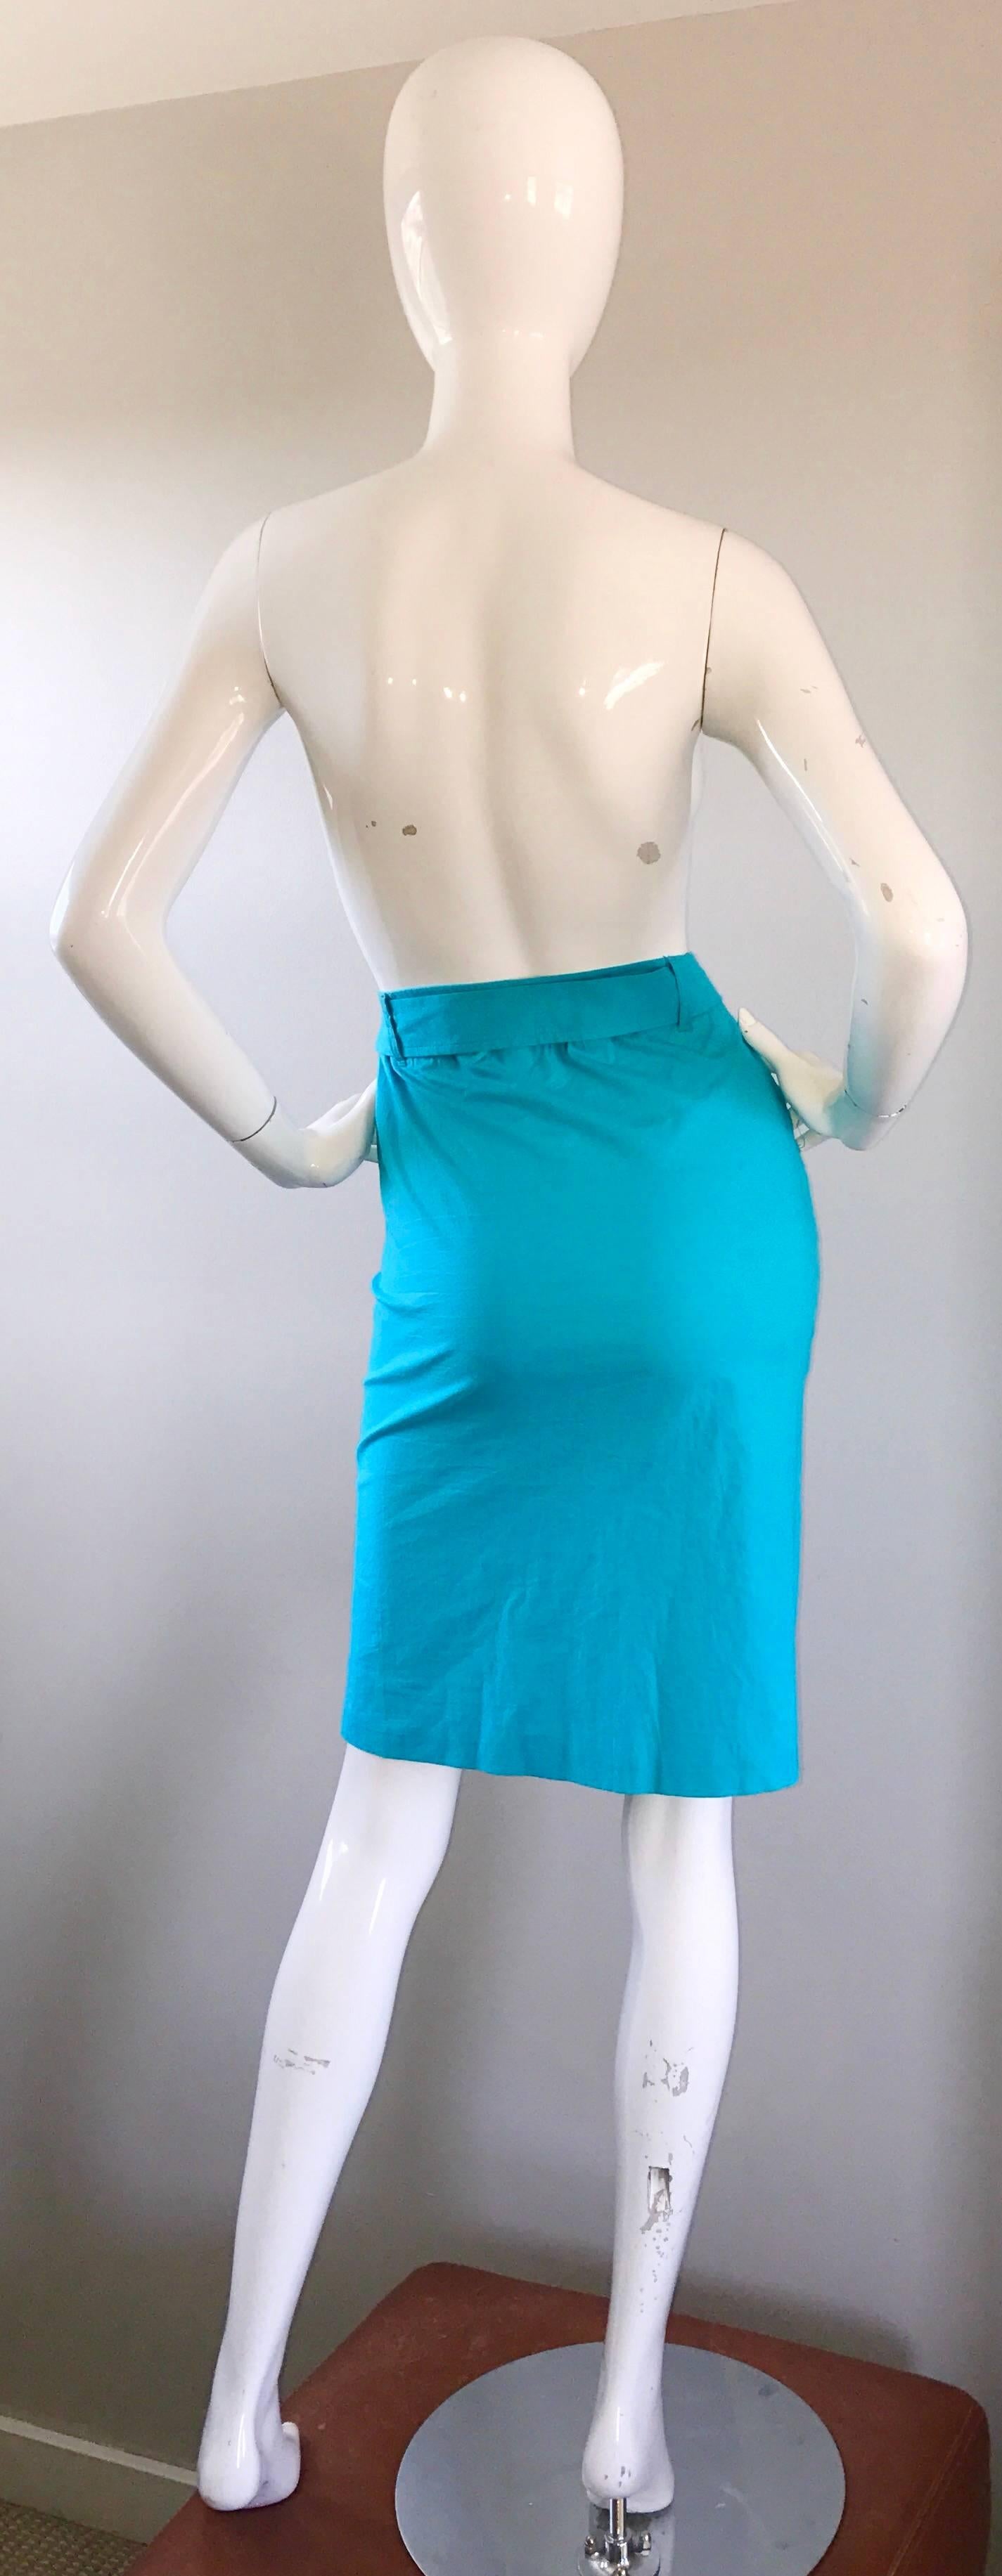 1990s Fendi By Karl Lagerfeld Vintage Turquoise Teal Blue Cotton Skirt w FF Belt In Excellent Condition For Sale In San Diego, CA